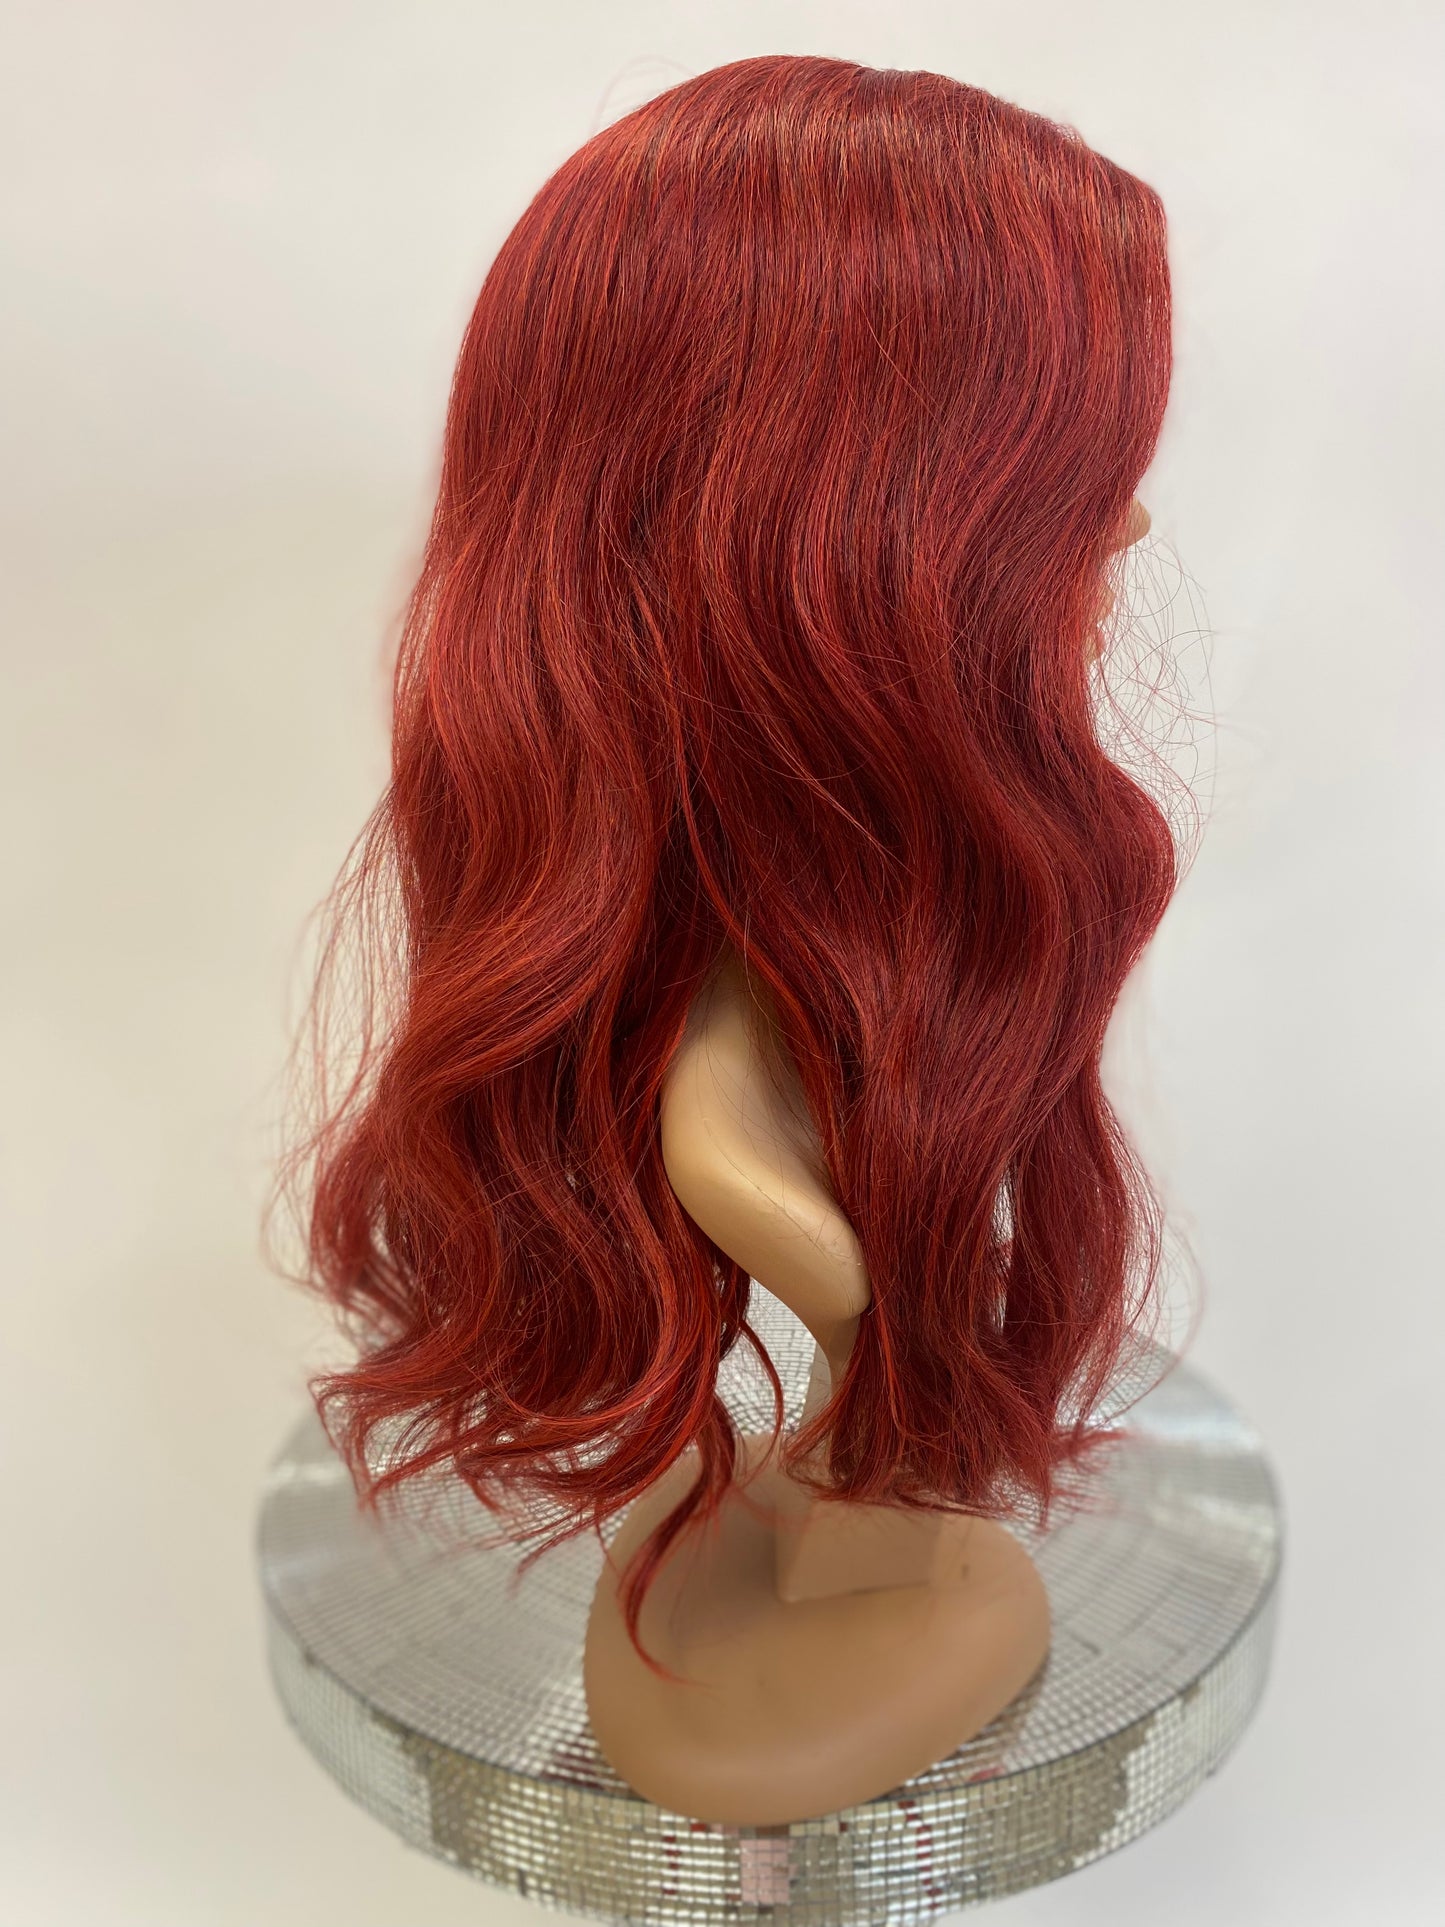 80 Andria - 13x4 Free Part Lace Front Wig - RED/BUG - DaizyKat Cosmetics 80 Andria - 13x4 Free Part Lace Front Wig - RED/BUG DaizyKat Cosmetics Wigs